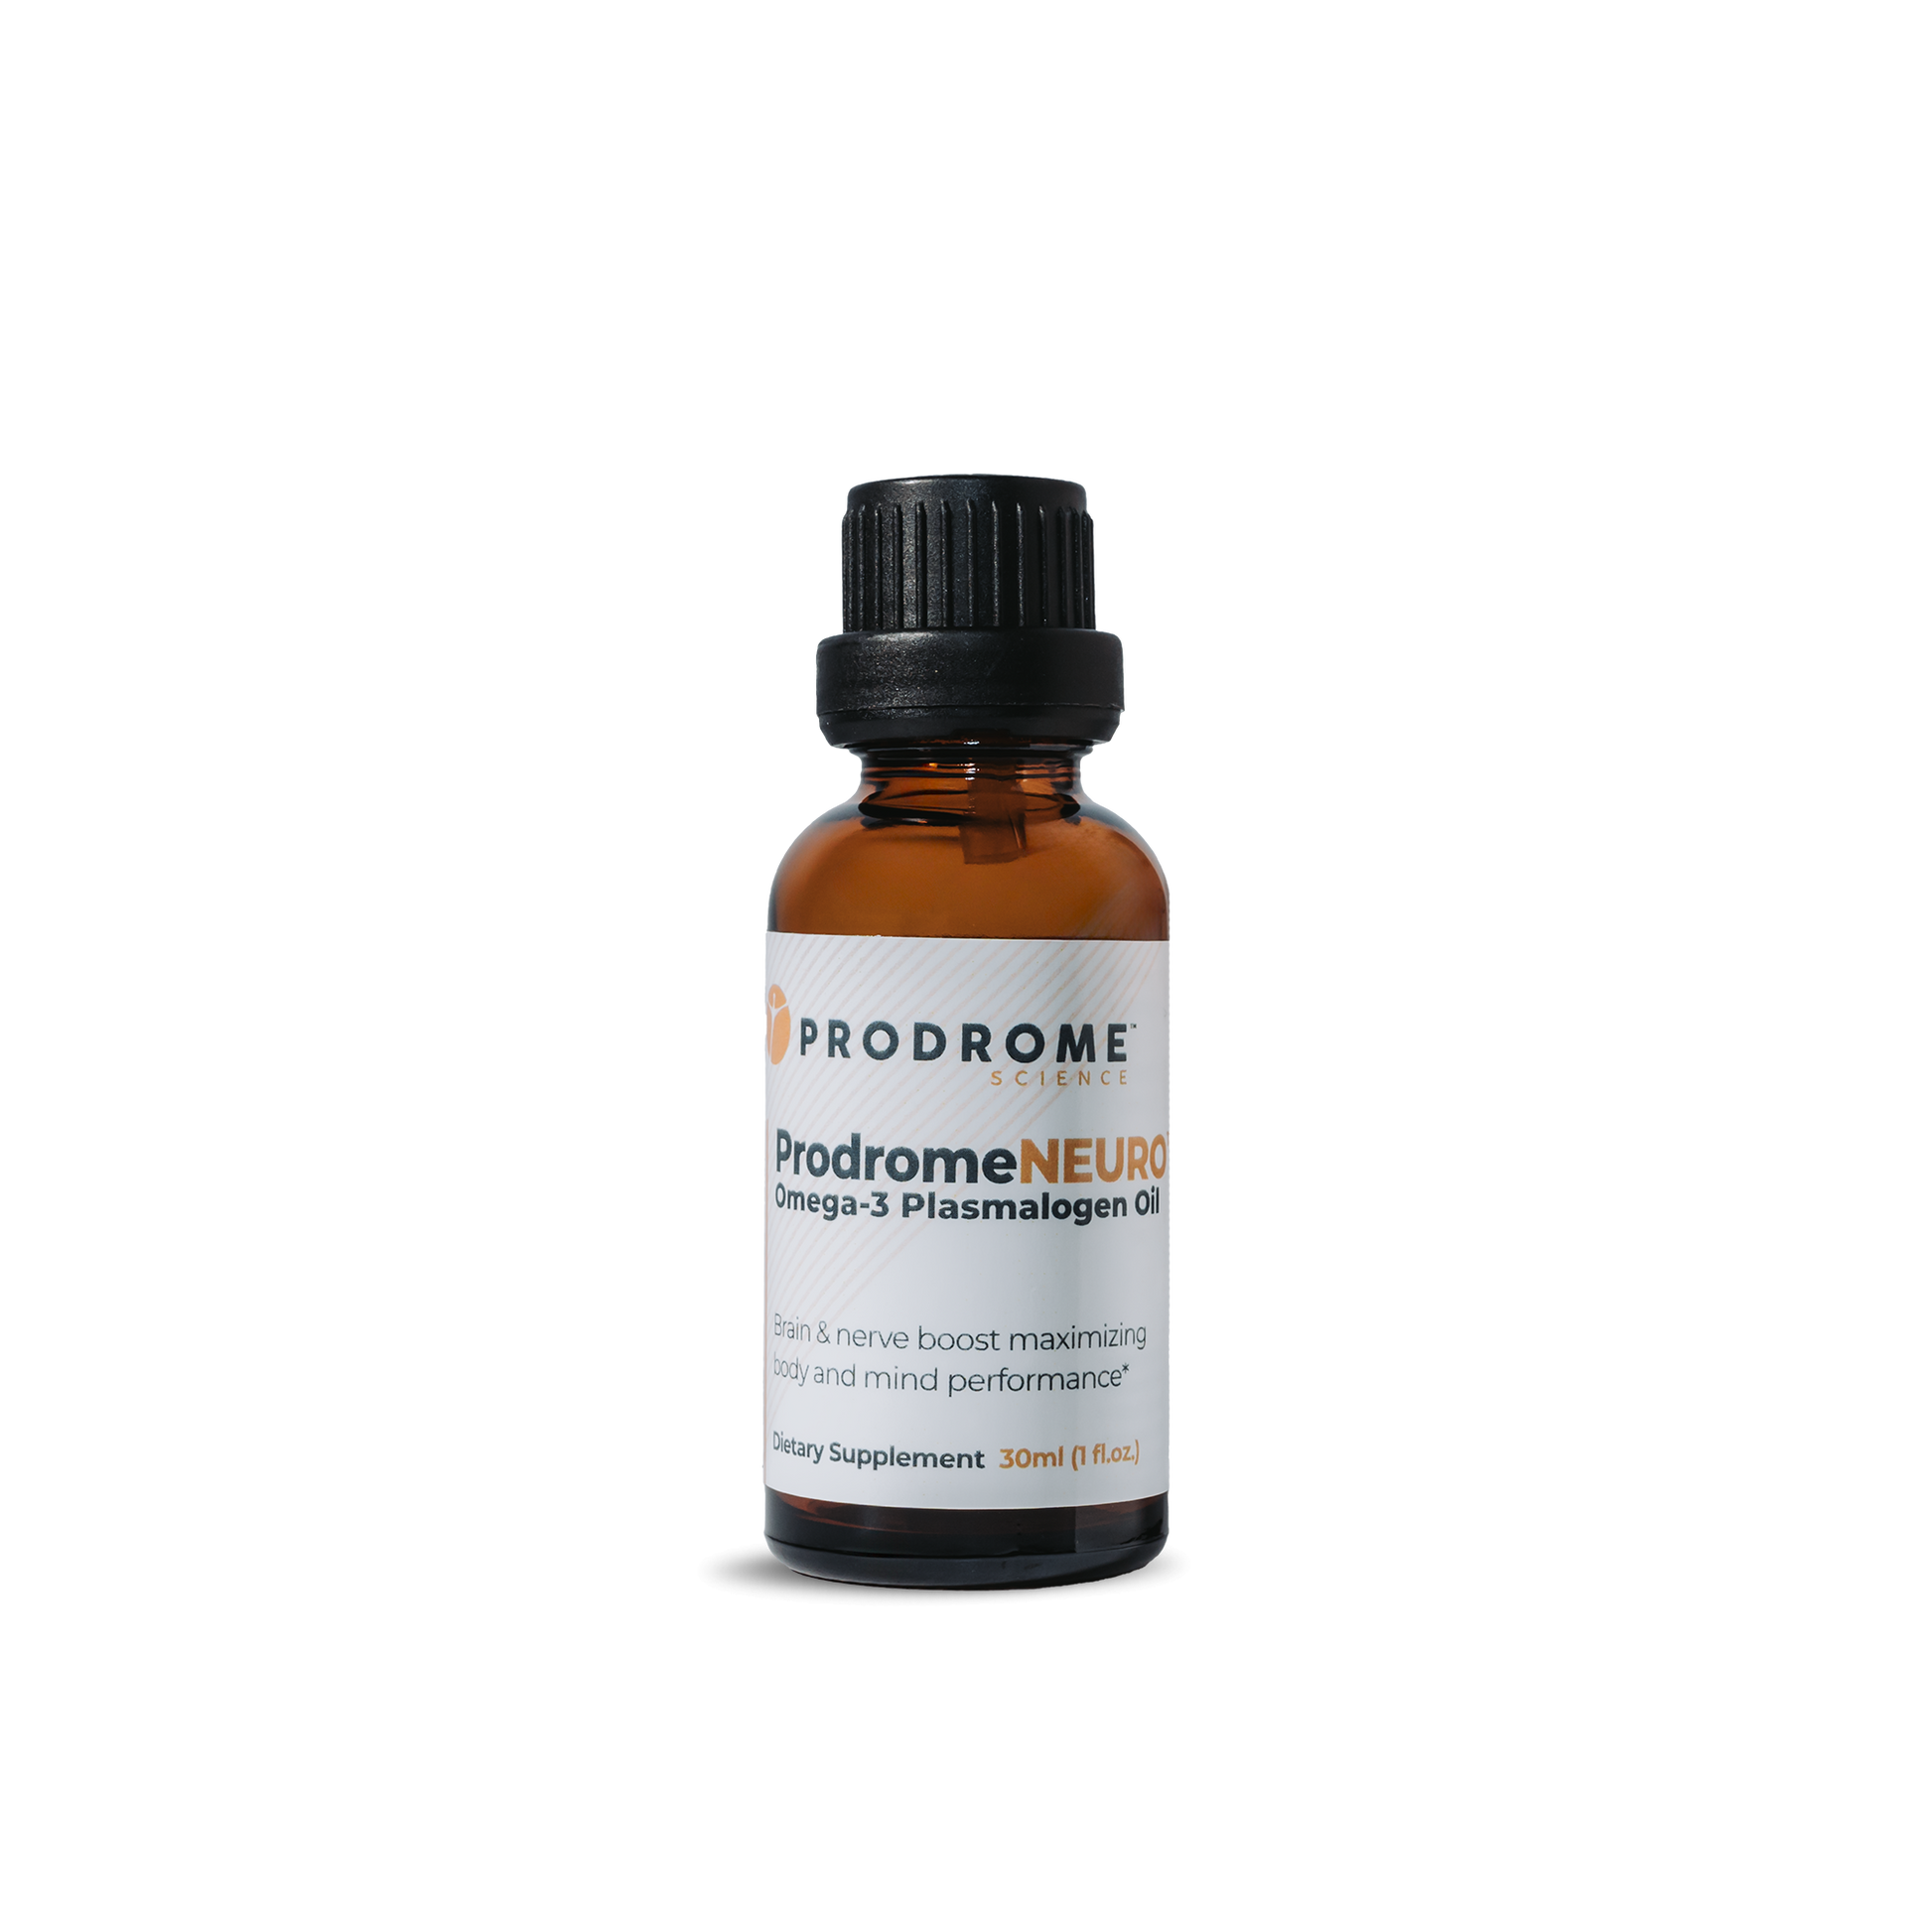 ProdromeNeuro™ contains the plasmalogen building blocks for neurons that make up brain gray matter. Neurons are cells that process and transmit information in the body. 